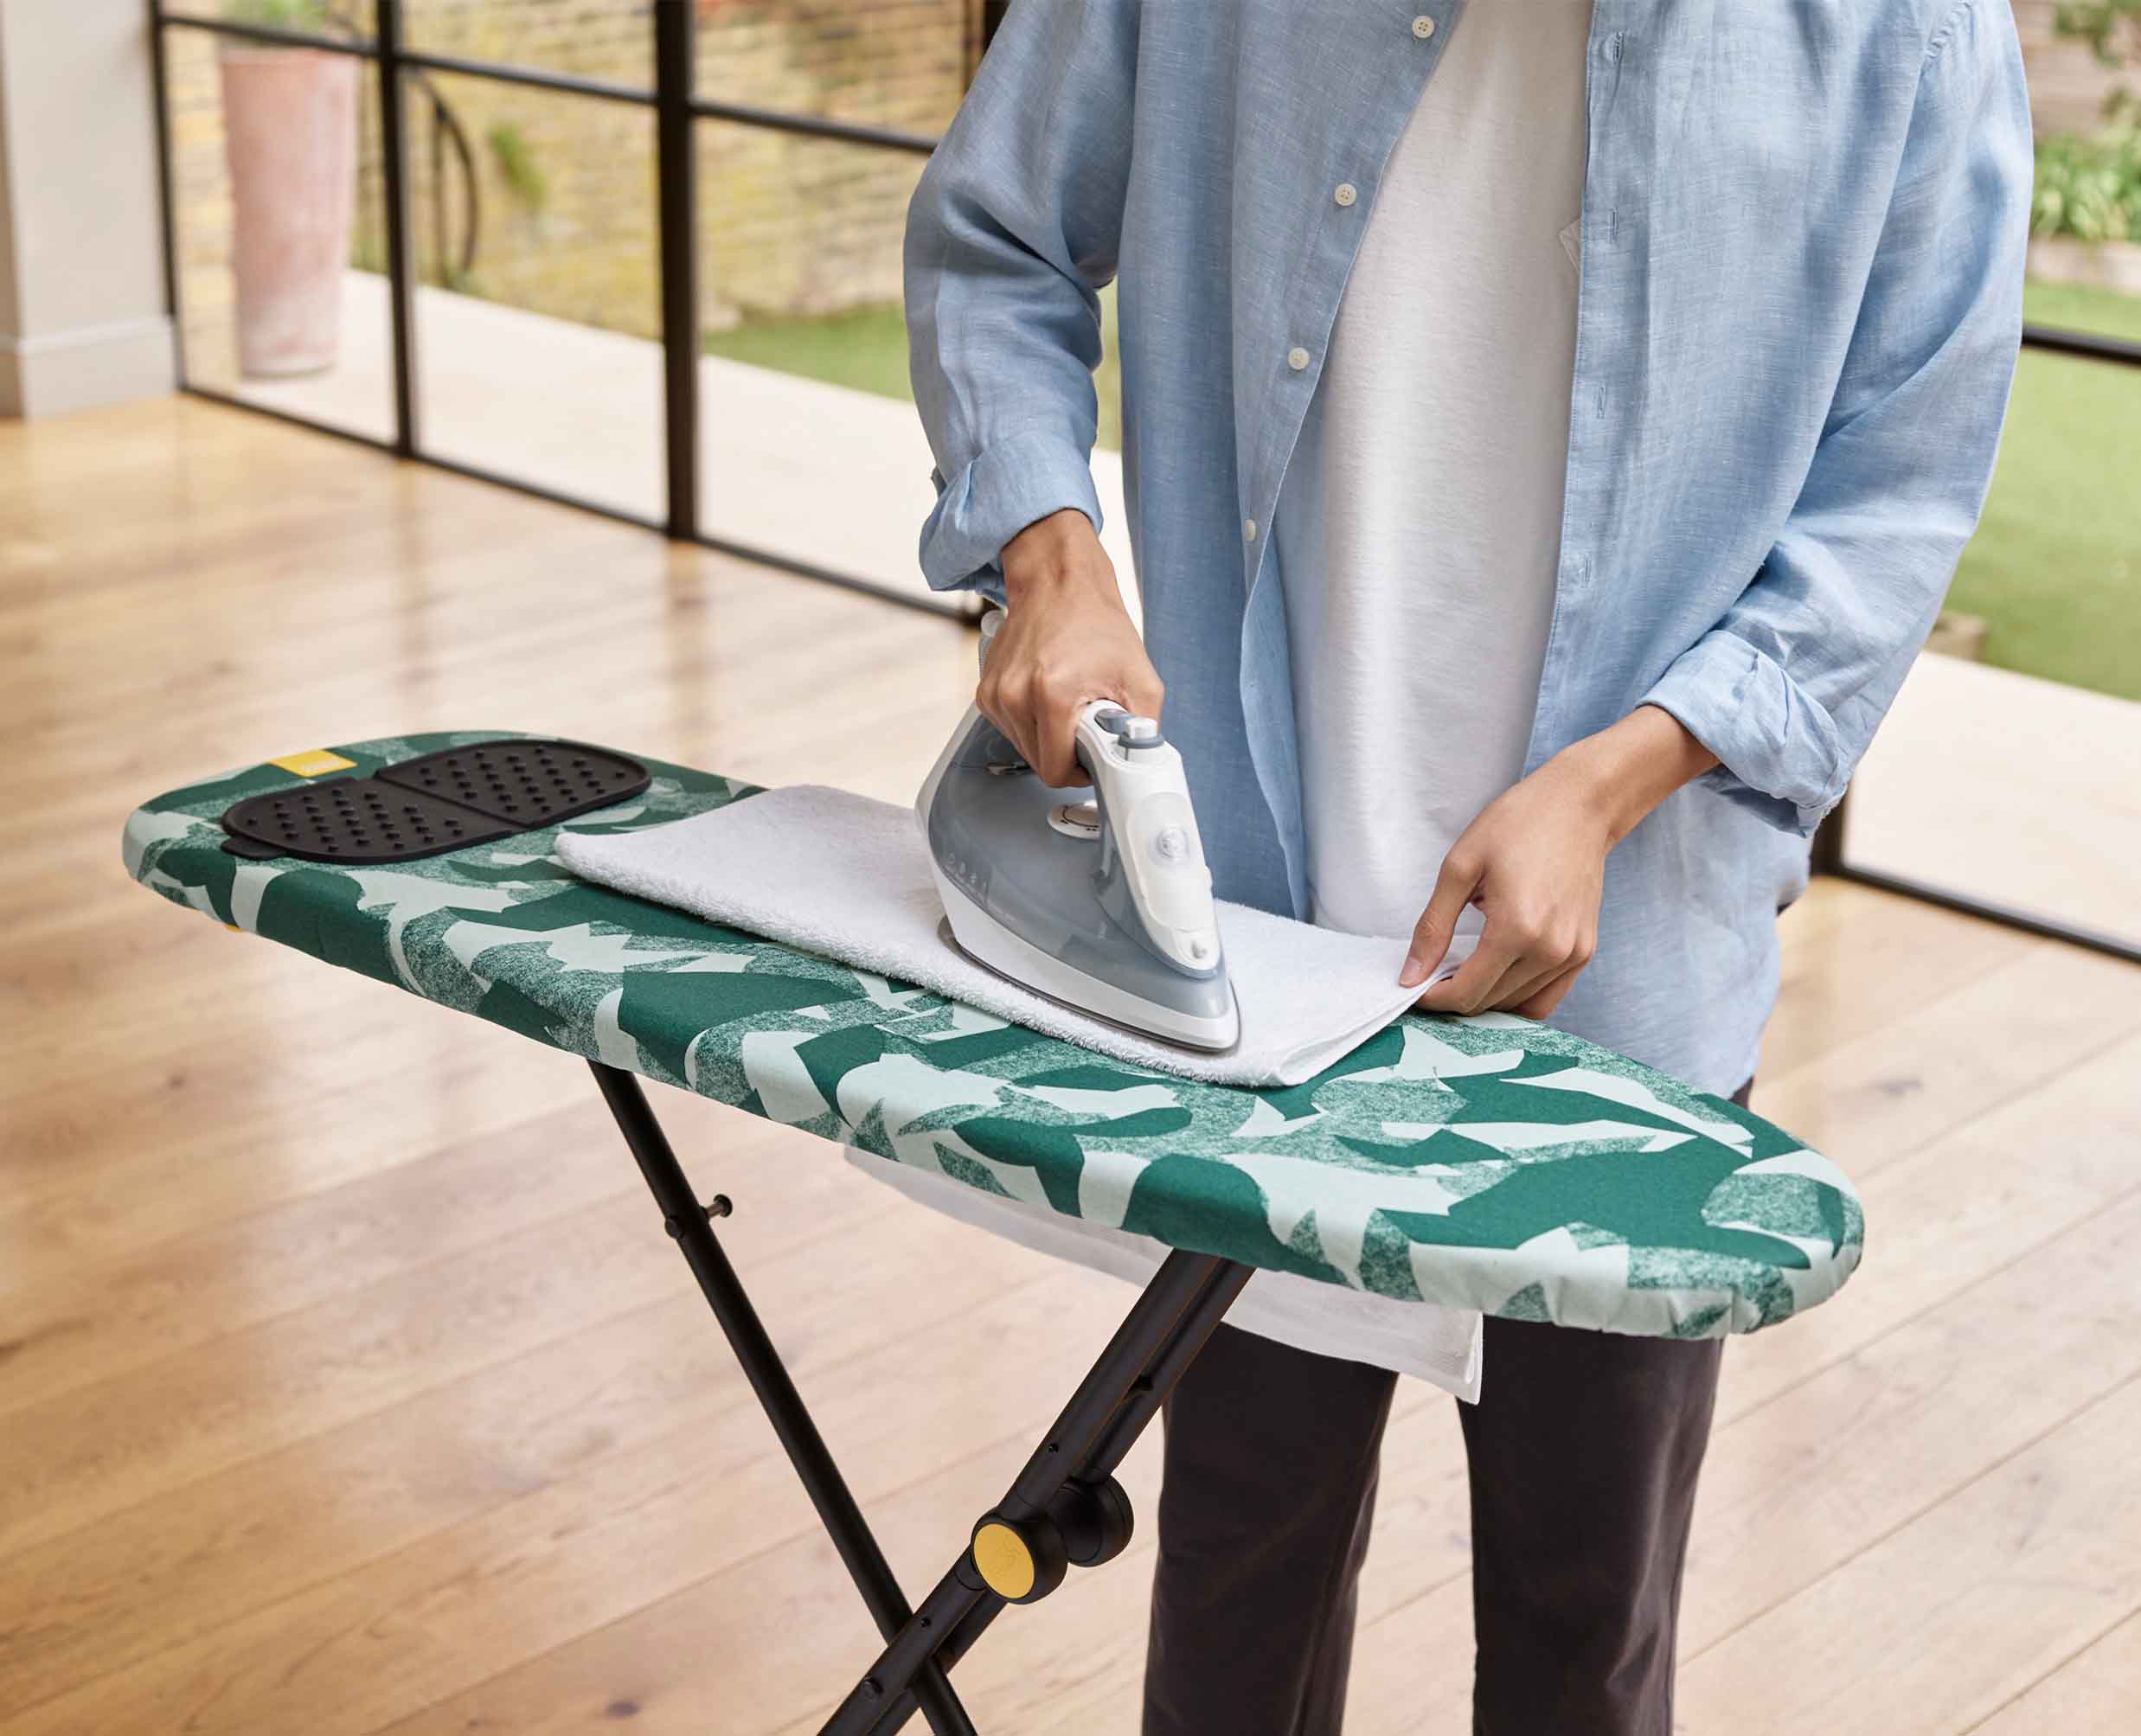 Glide Compact Easy-store Ironing Board - 50034 - Image 3